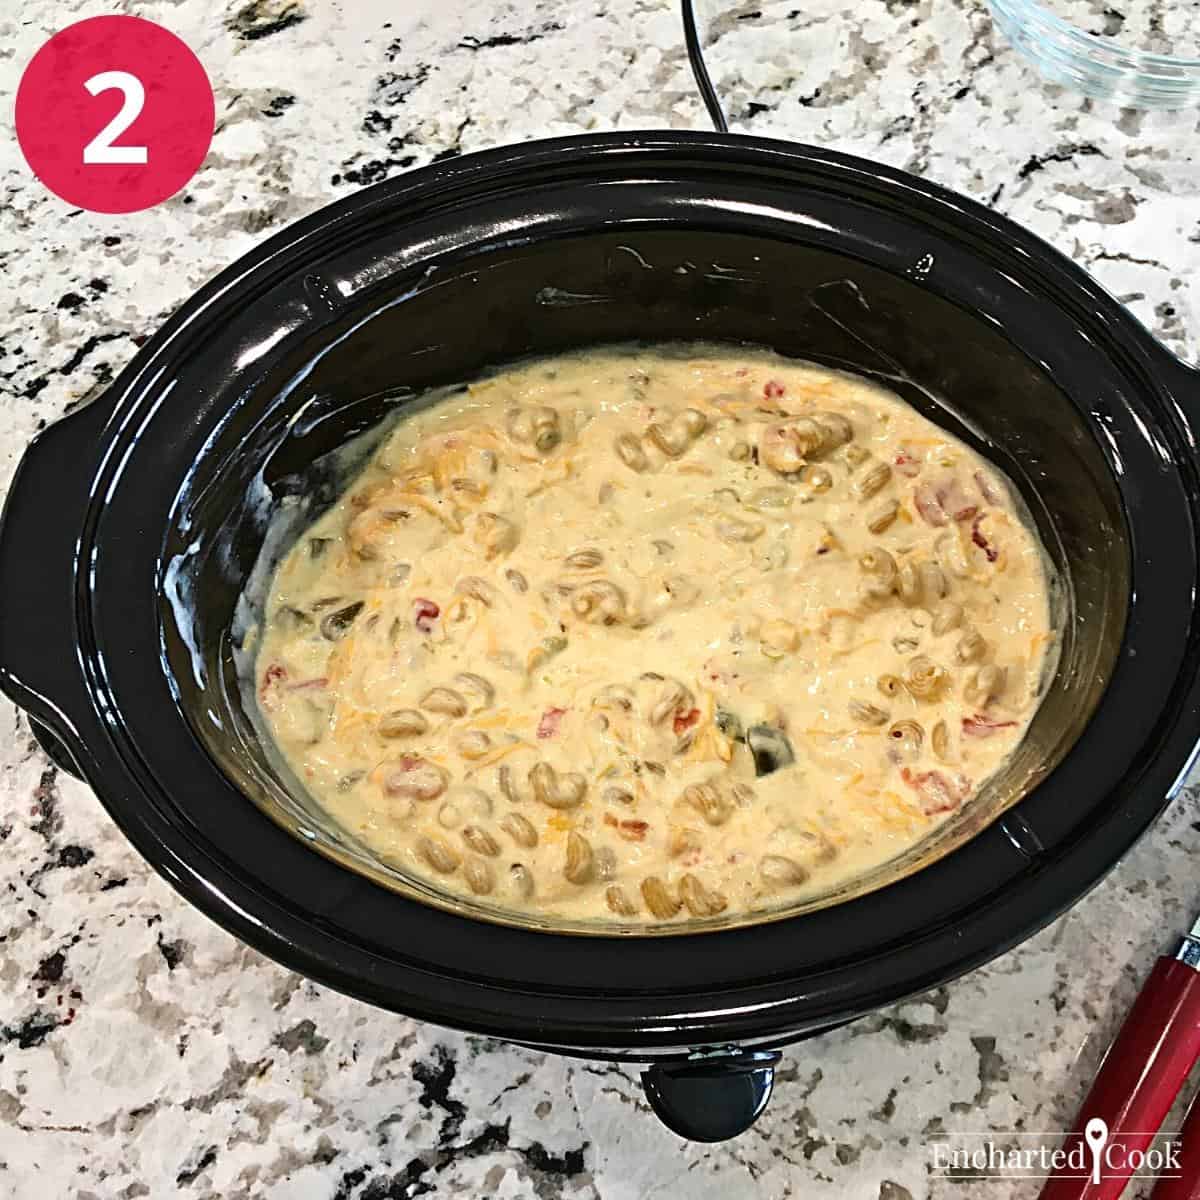 Macaroni and shredded cheddar cheese are stirred into the macaroni and cheese sauce ingredients in a large slow cooker.